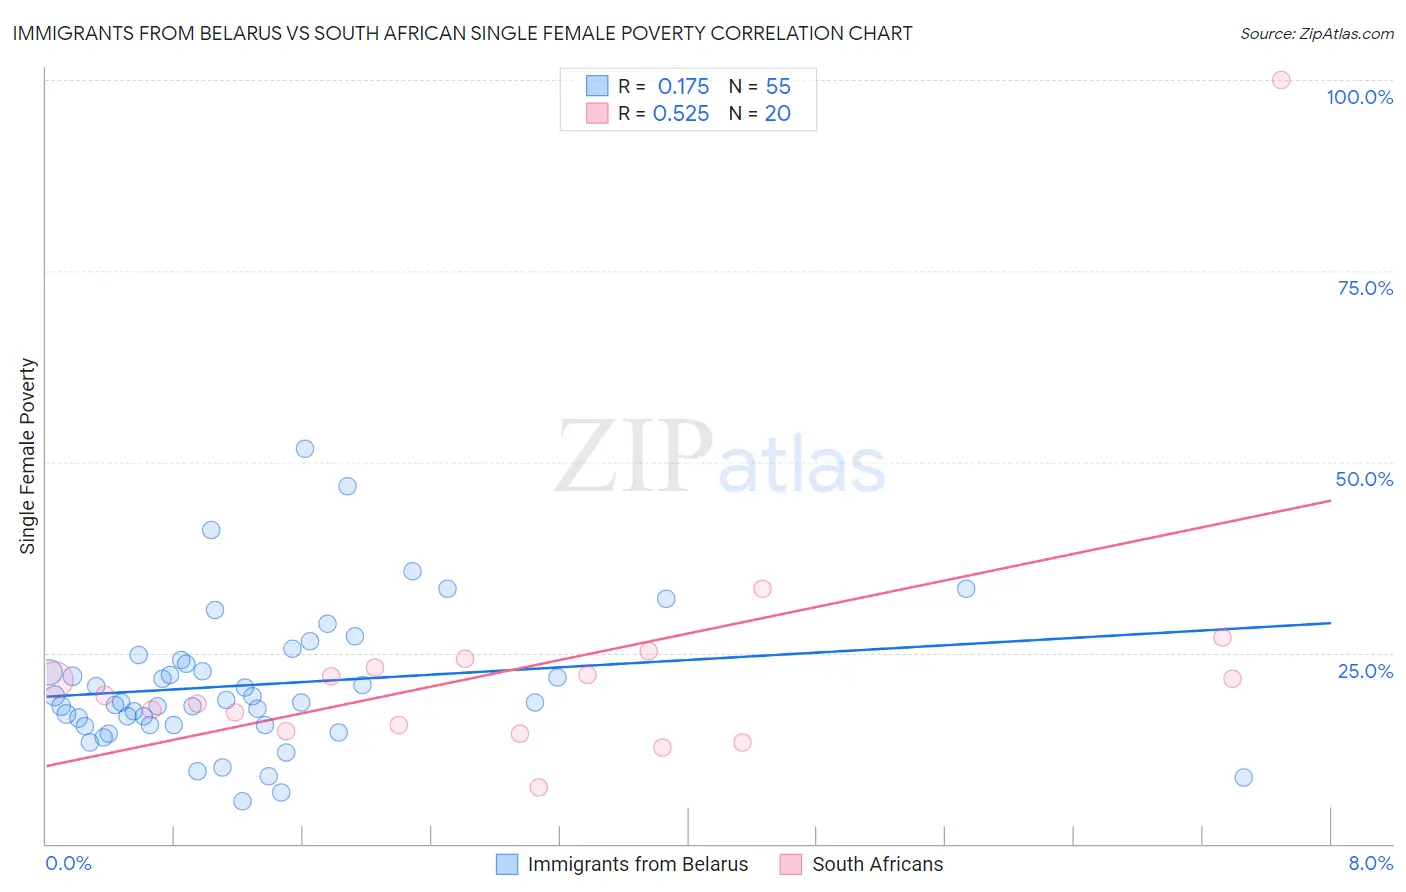 Immigrants from Belarus vs South African Single Female Poverty